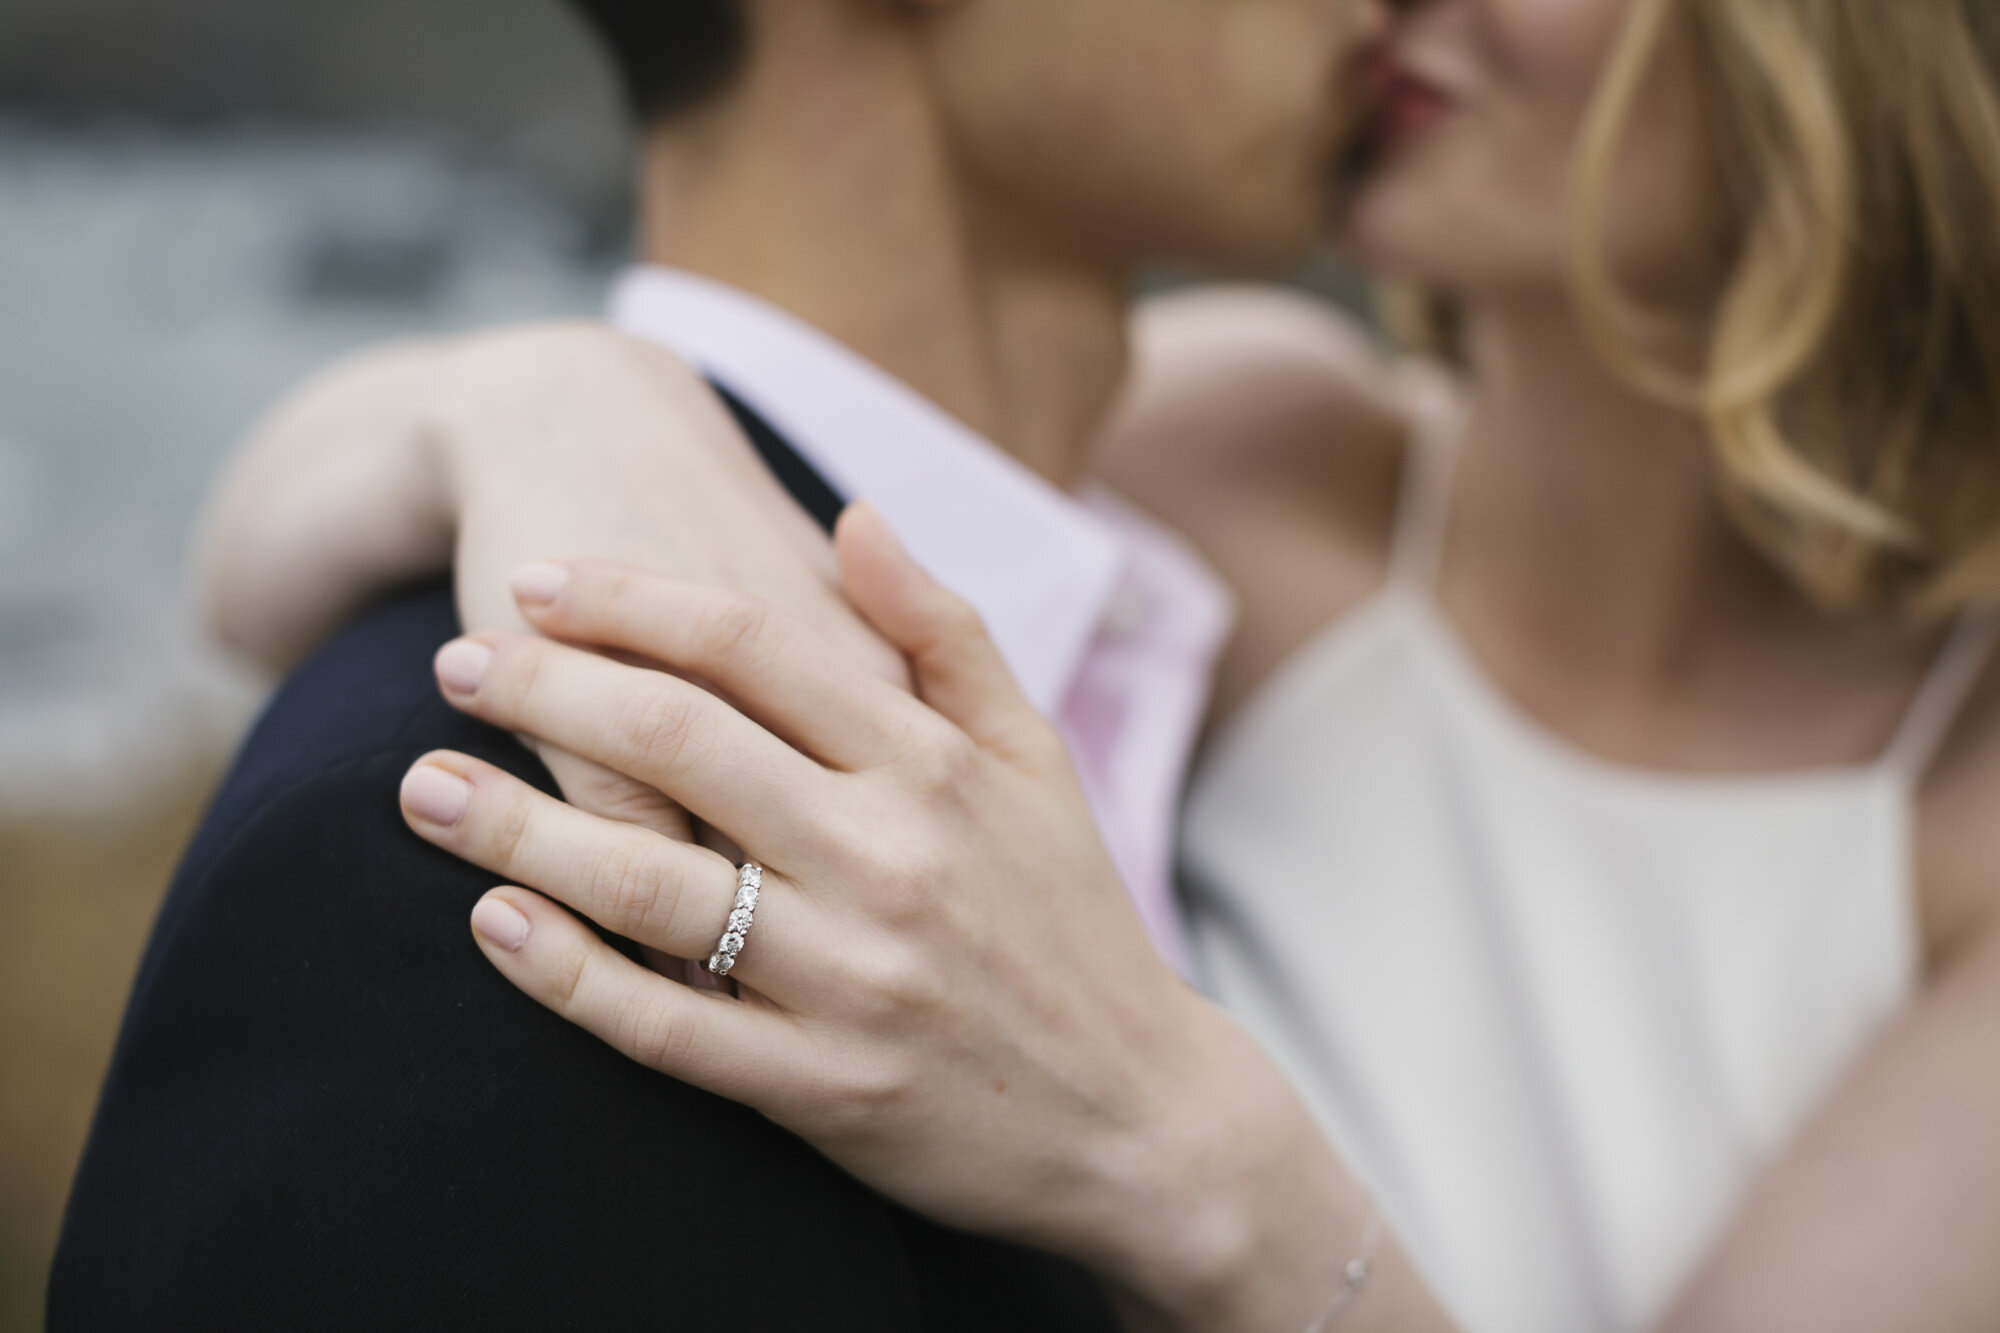 A close up of a woman's wedding ring on her hand while couple kiss in the background